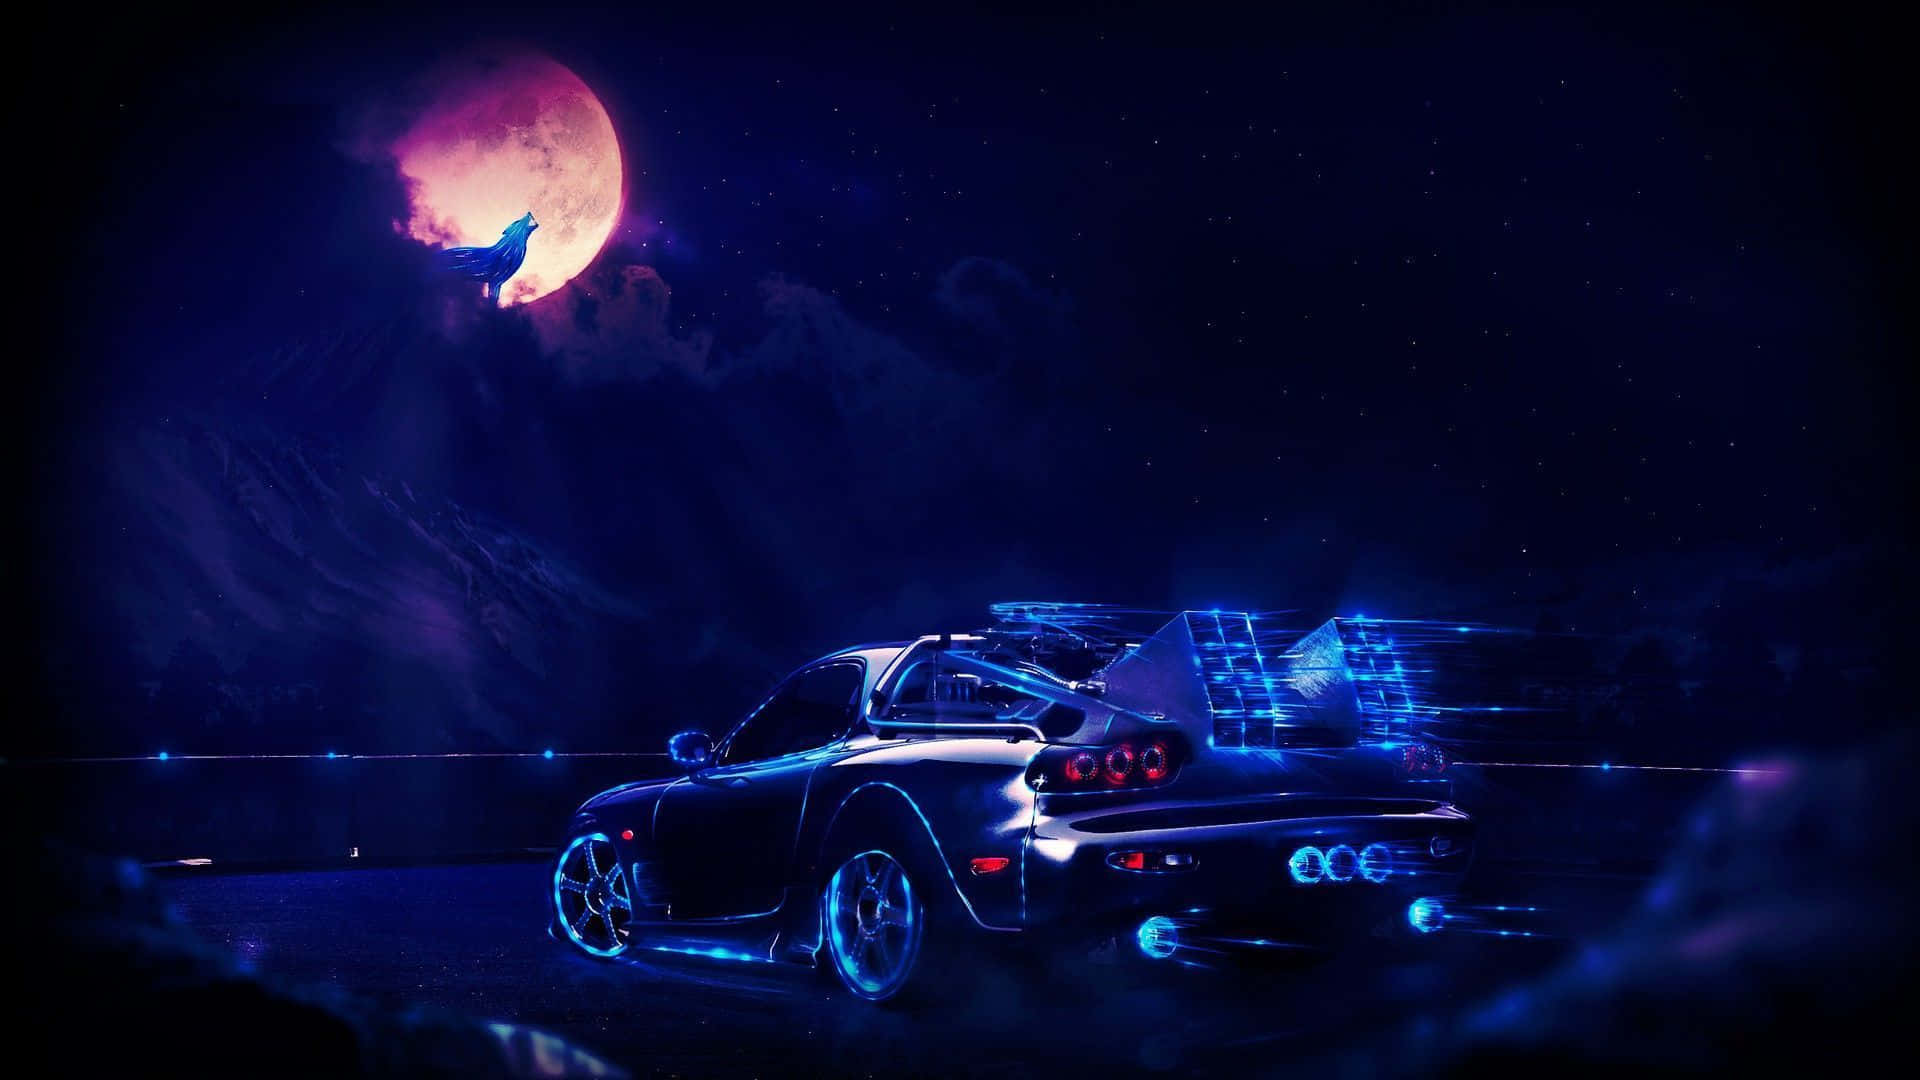 A Car Is In The Night Sky With A Moon Wallpaper